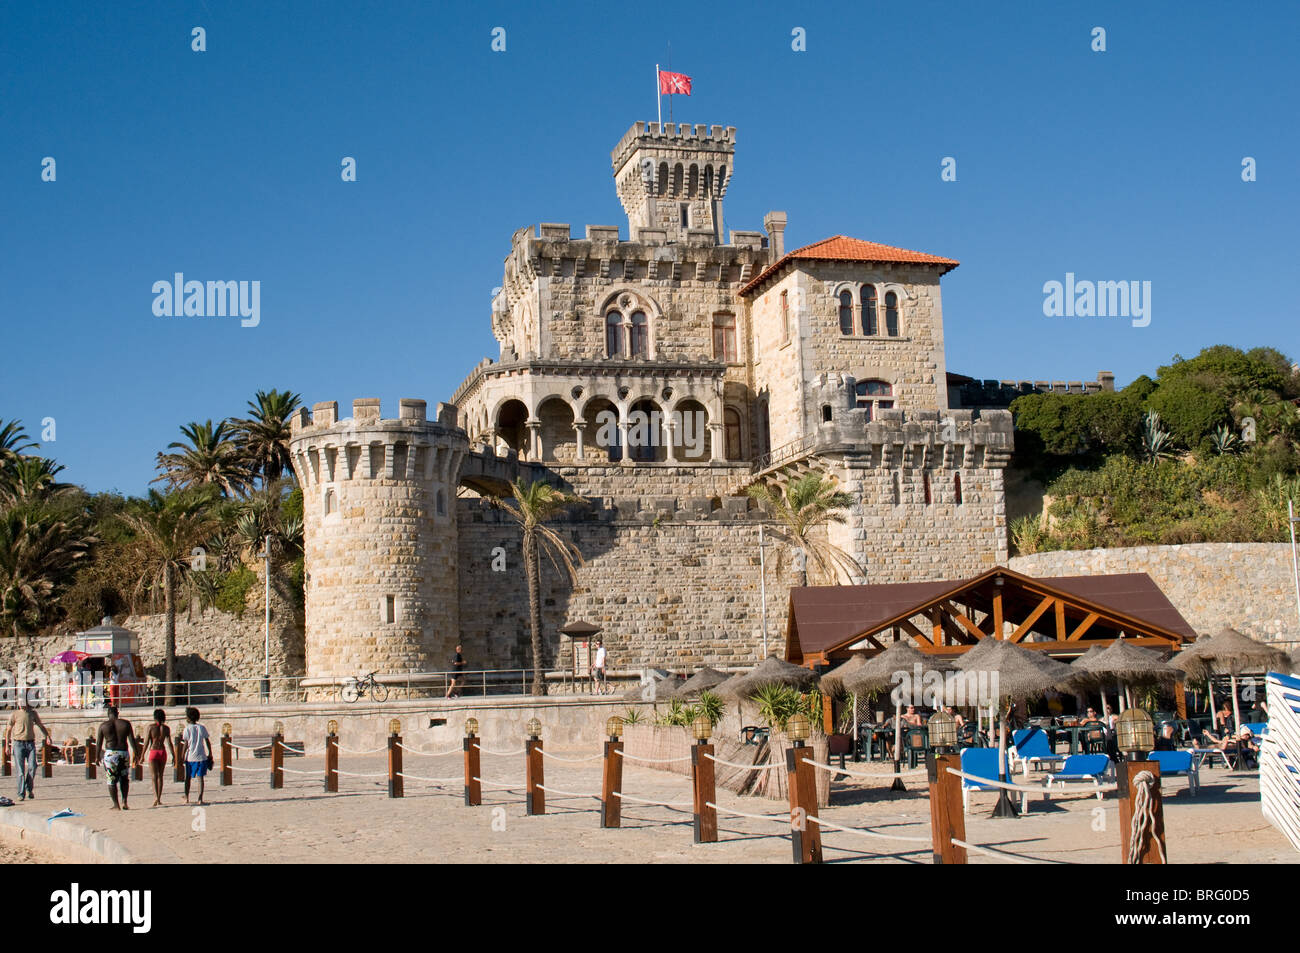 This wonderful castle sits between Tamariz beach and the railway line in Estoril, Portugal Stock Photo